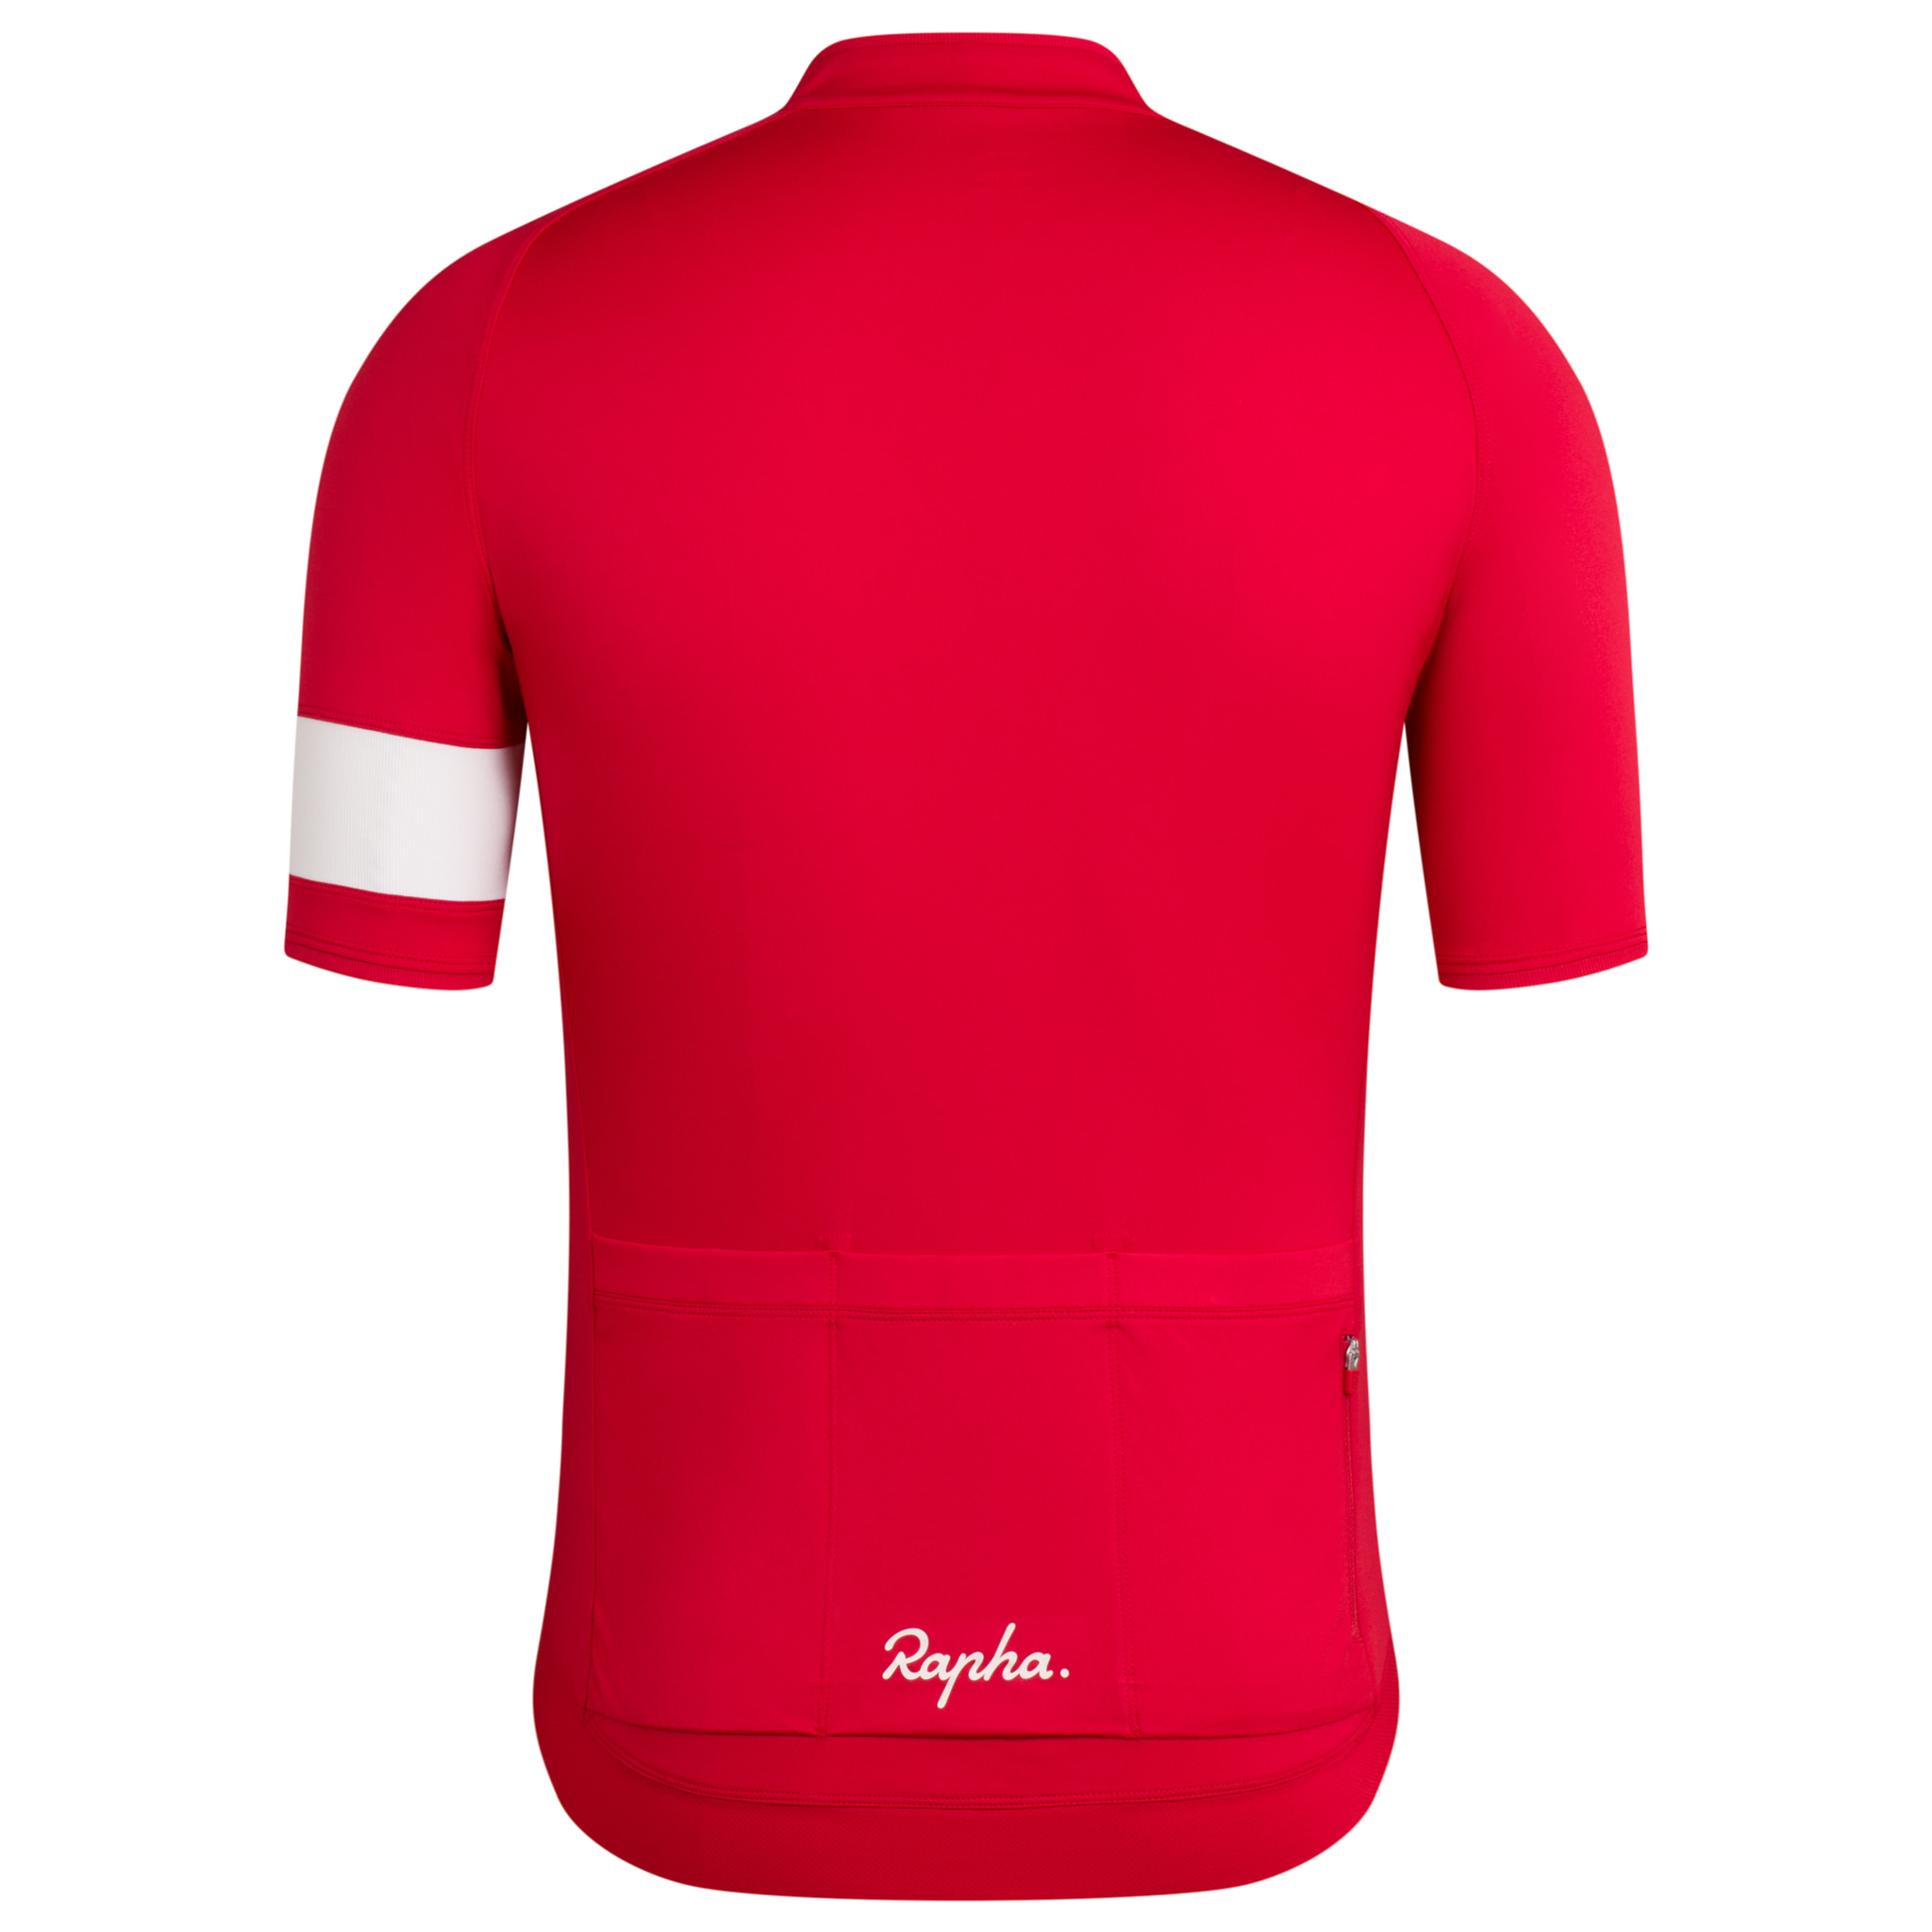 Performance Polo Compression Cycling Jersey Top T Shirt Flat